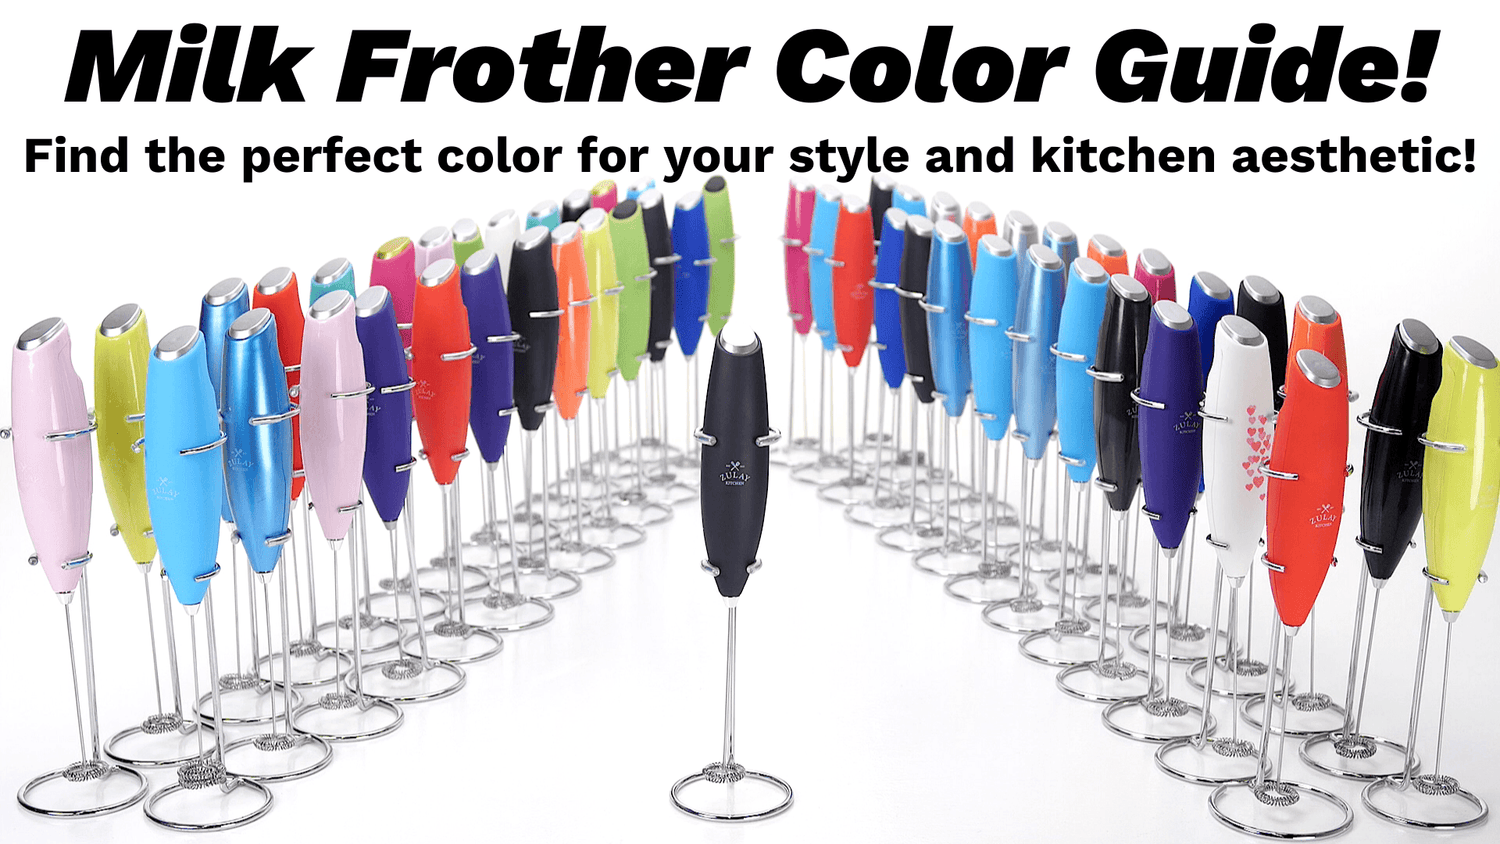 The Official Milk Boss Milk Frother Color Guide! - Zulay Kitchen